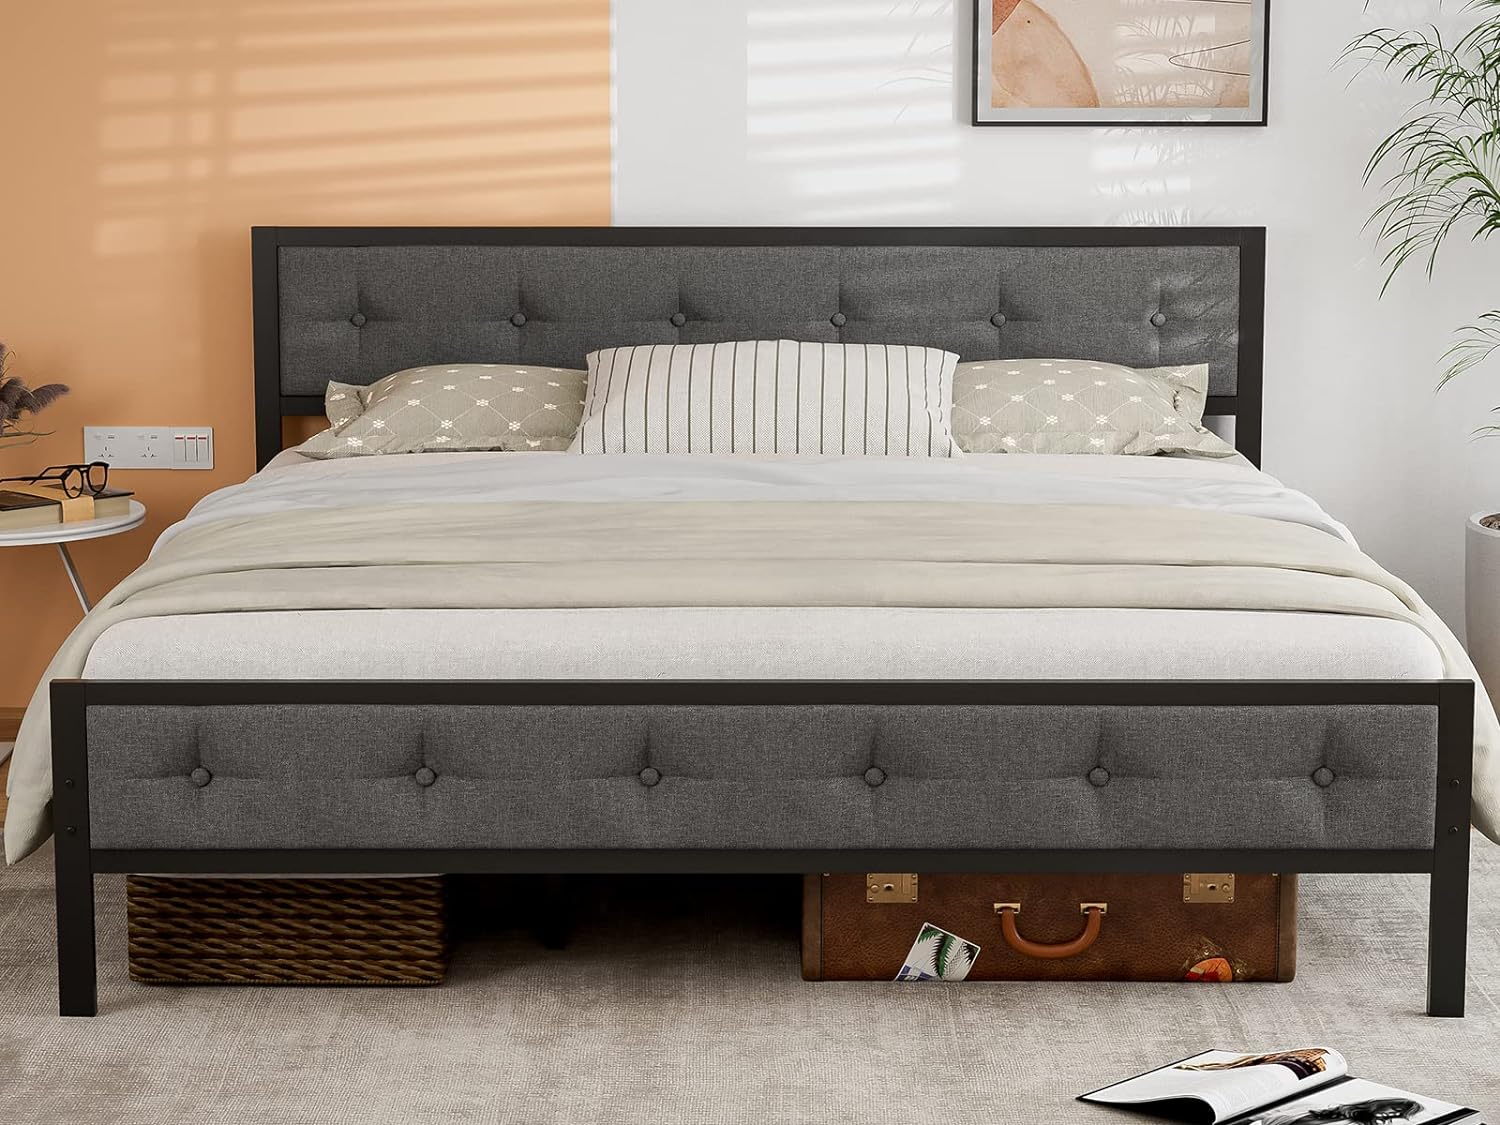 IKIFLY Metal King Size Bed Frame with Upholstered Linen Headboard Footboard, Mattress Foundation, Heavy Duty Metal Slats, Easy Assembly, No Box Spring Needed - Dark Grey, King